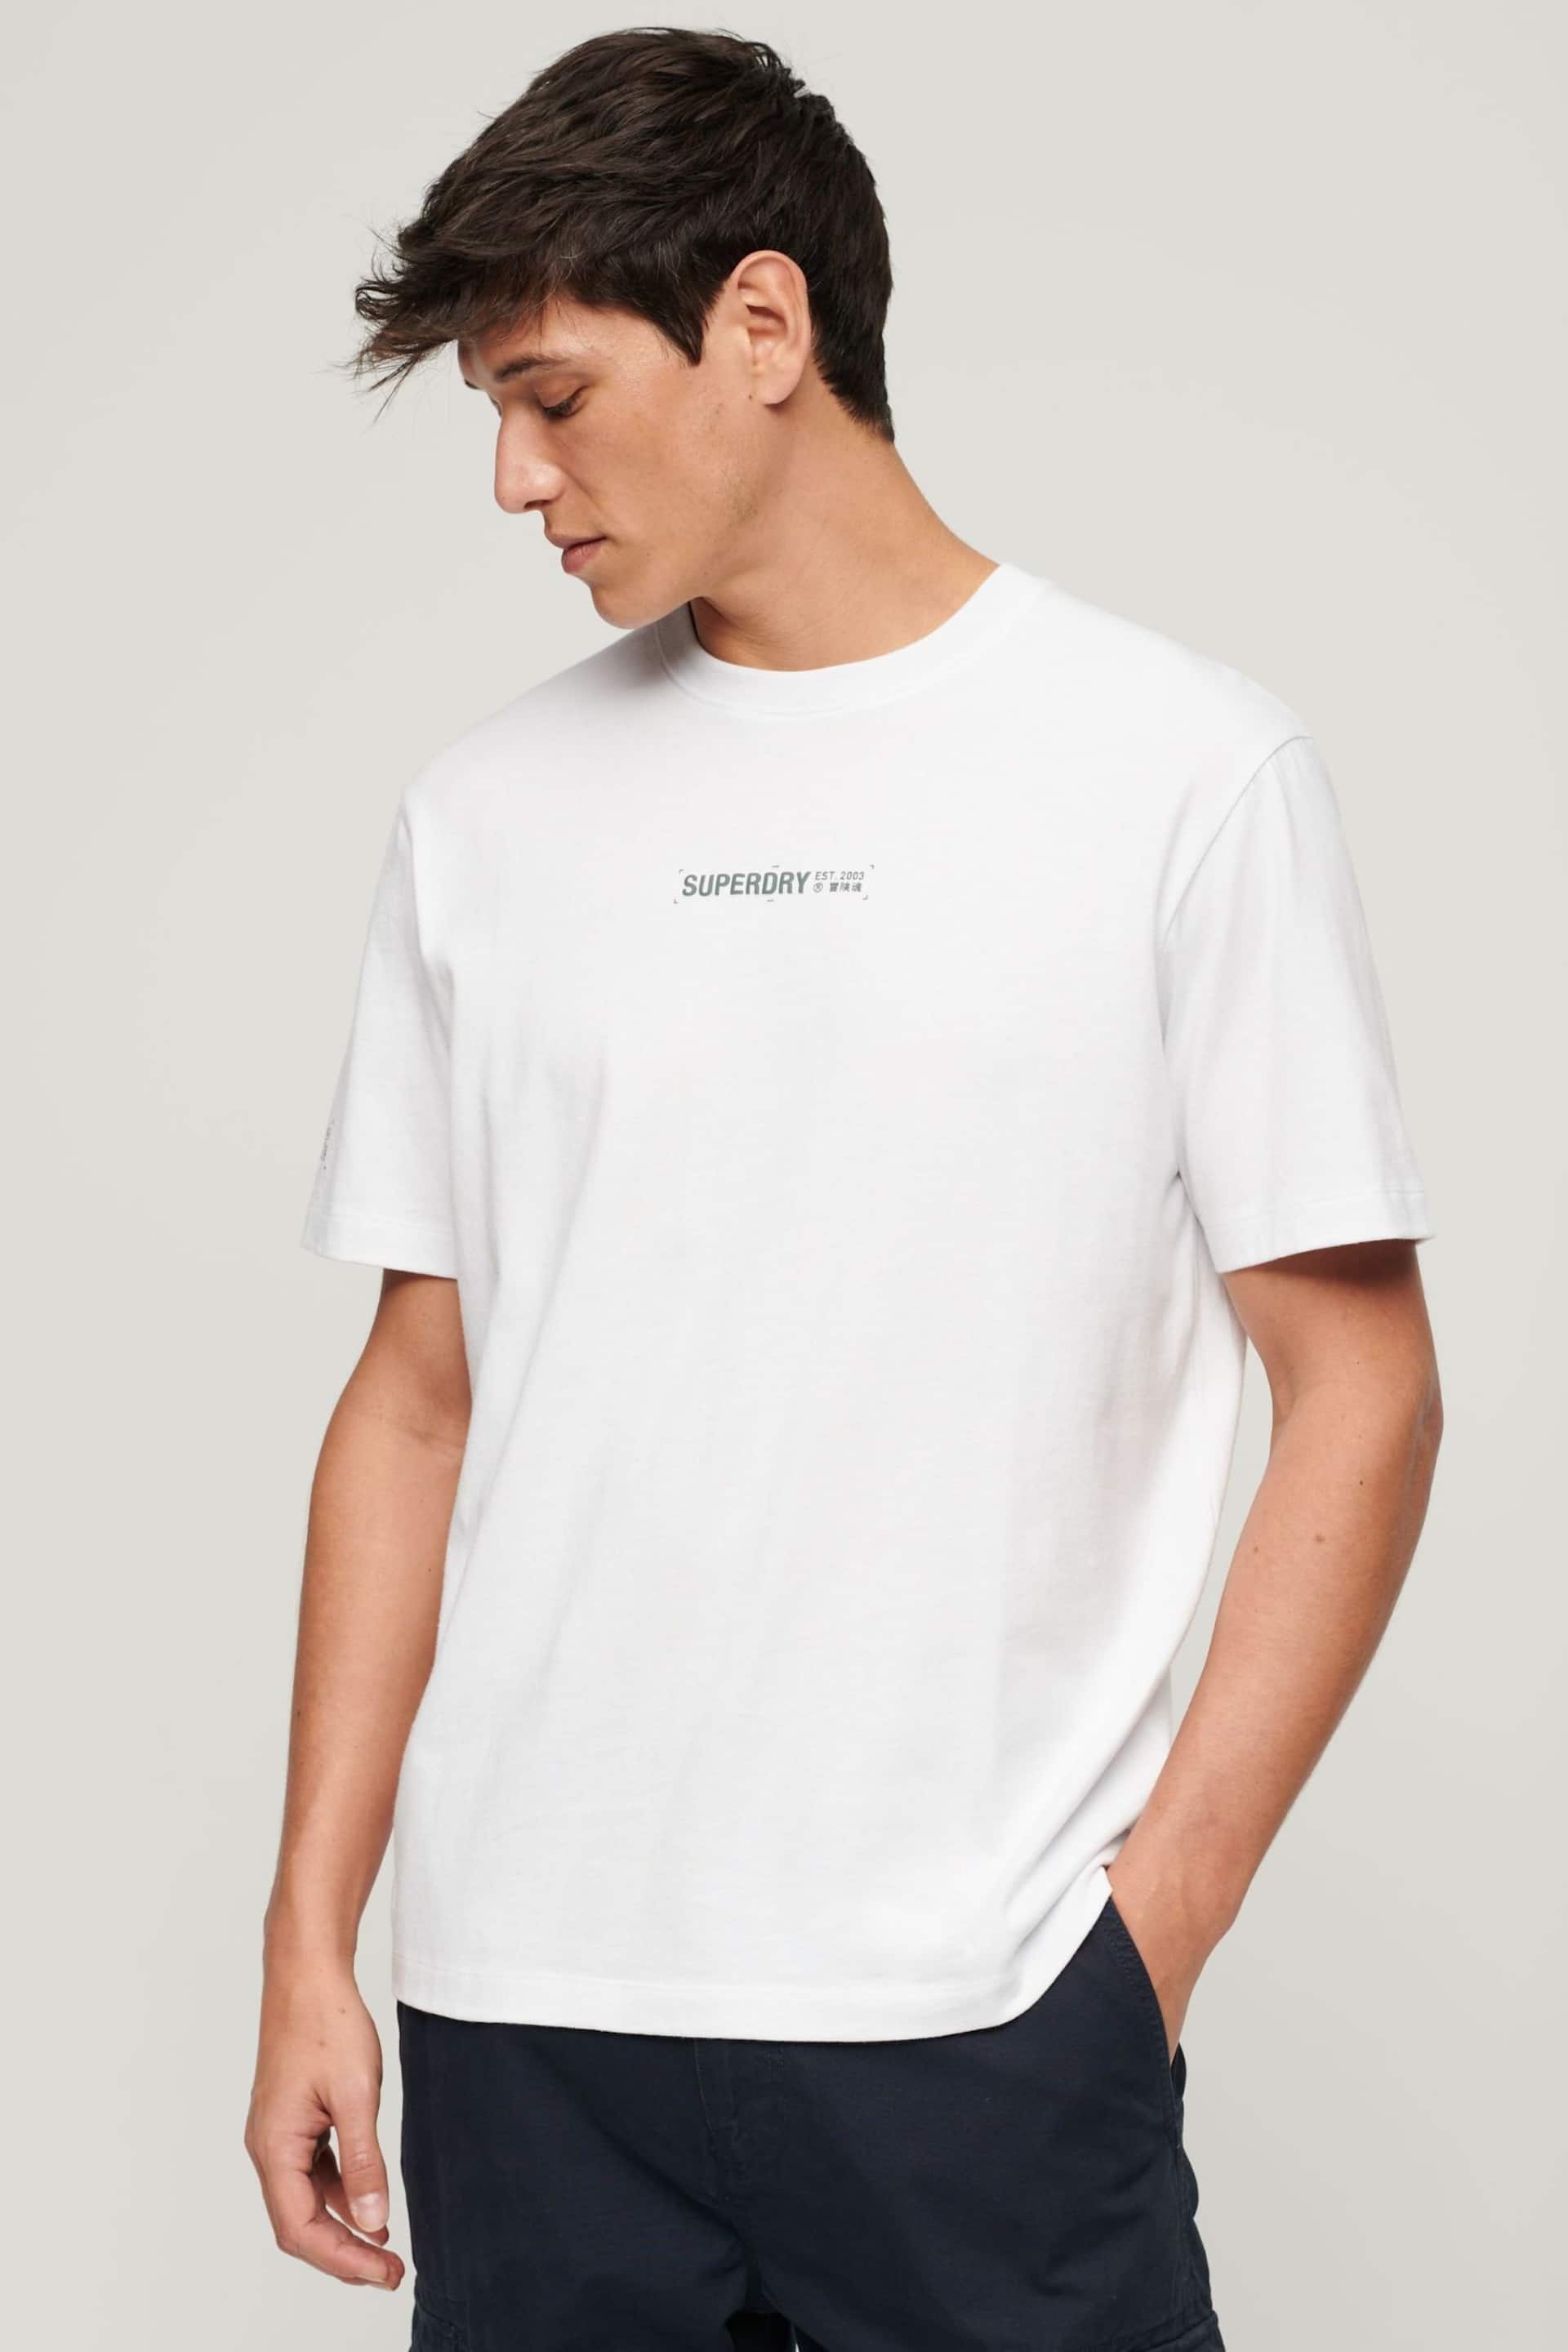 Superdry White Loose Fit Utility Sport Logo T-Shirt - Image 1 of 5